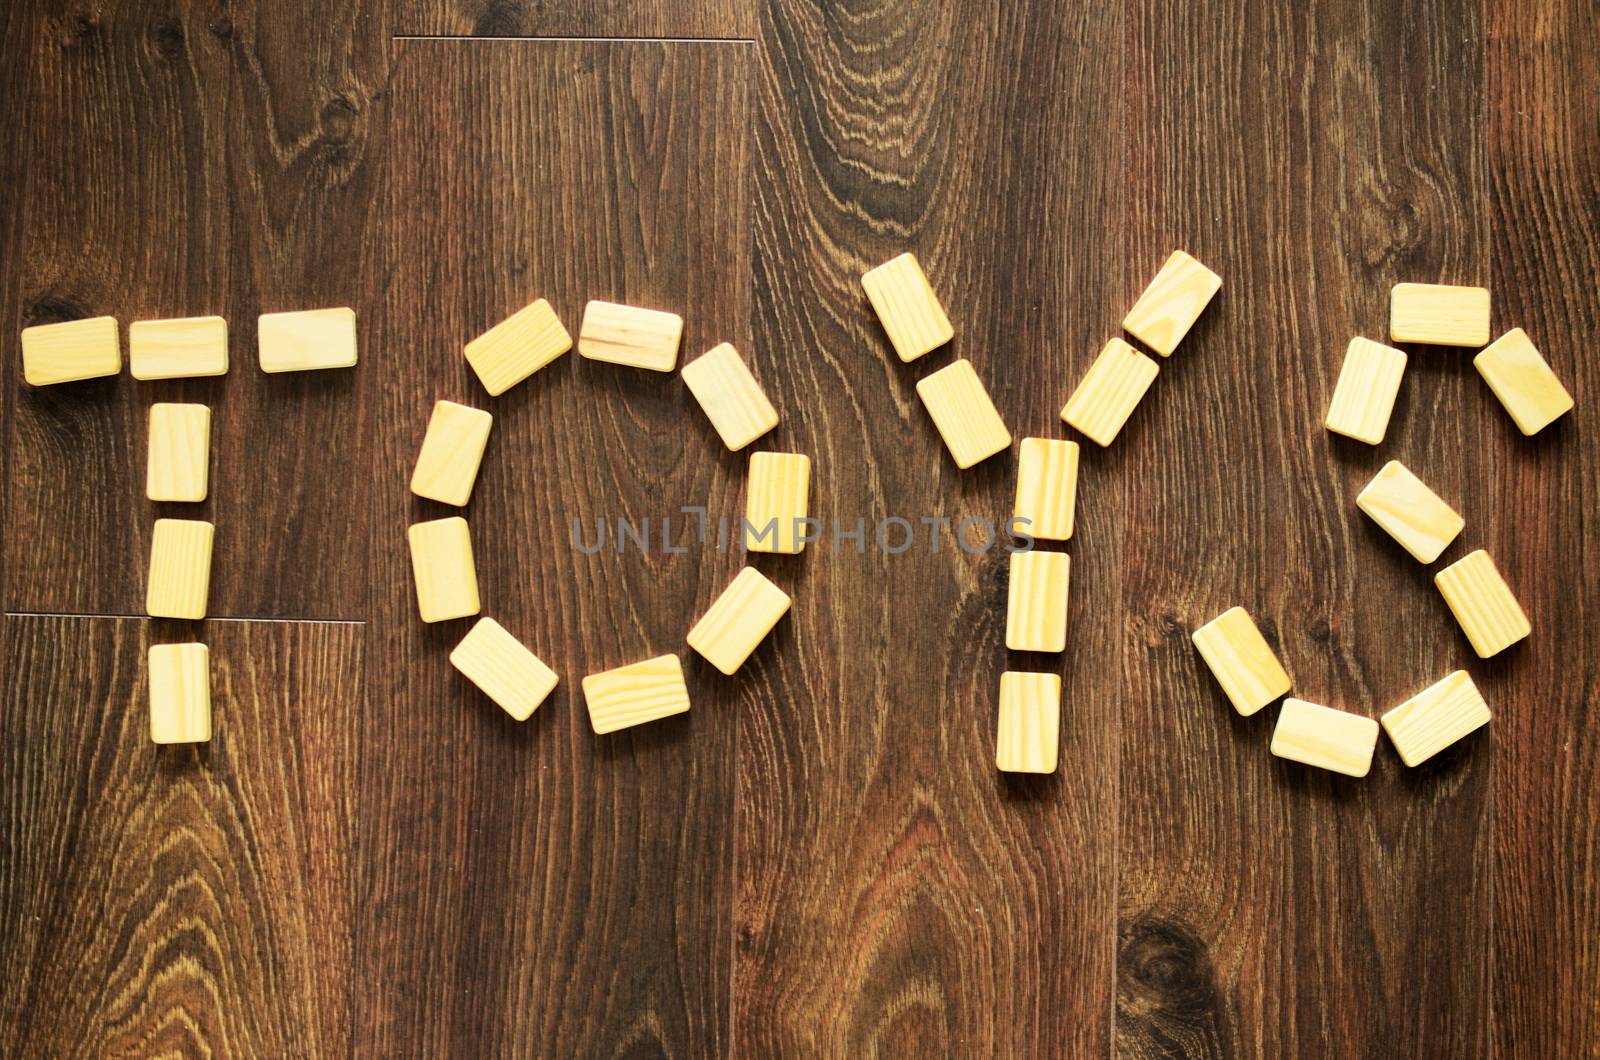 Word toys arranged by wooden blocks on wooden, brown floor.